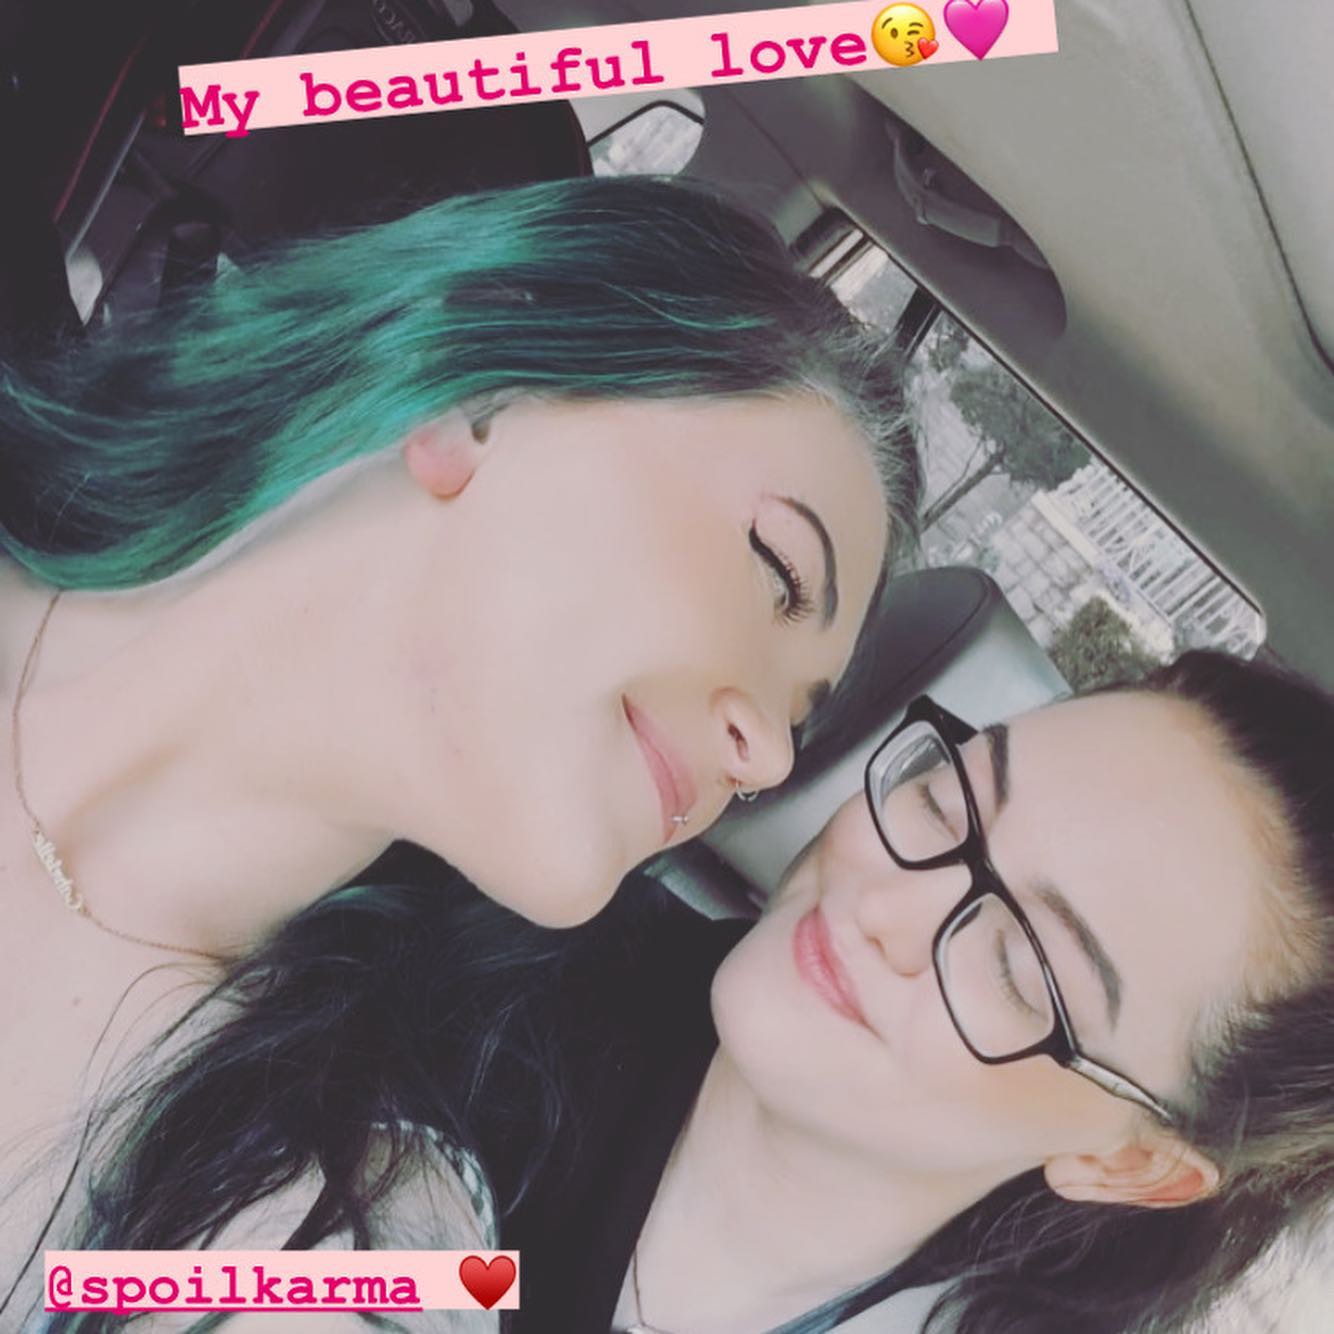 Happiest I have ever been and so beyond in love with the most beautiful girl in the whole world🥰🩷😘 @spoilkarma I love you more than anything 🩷♥️